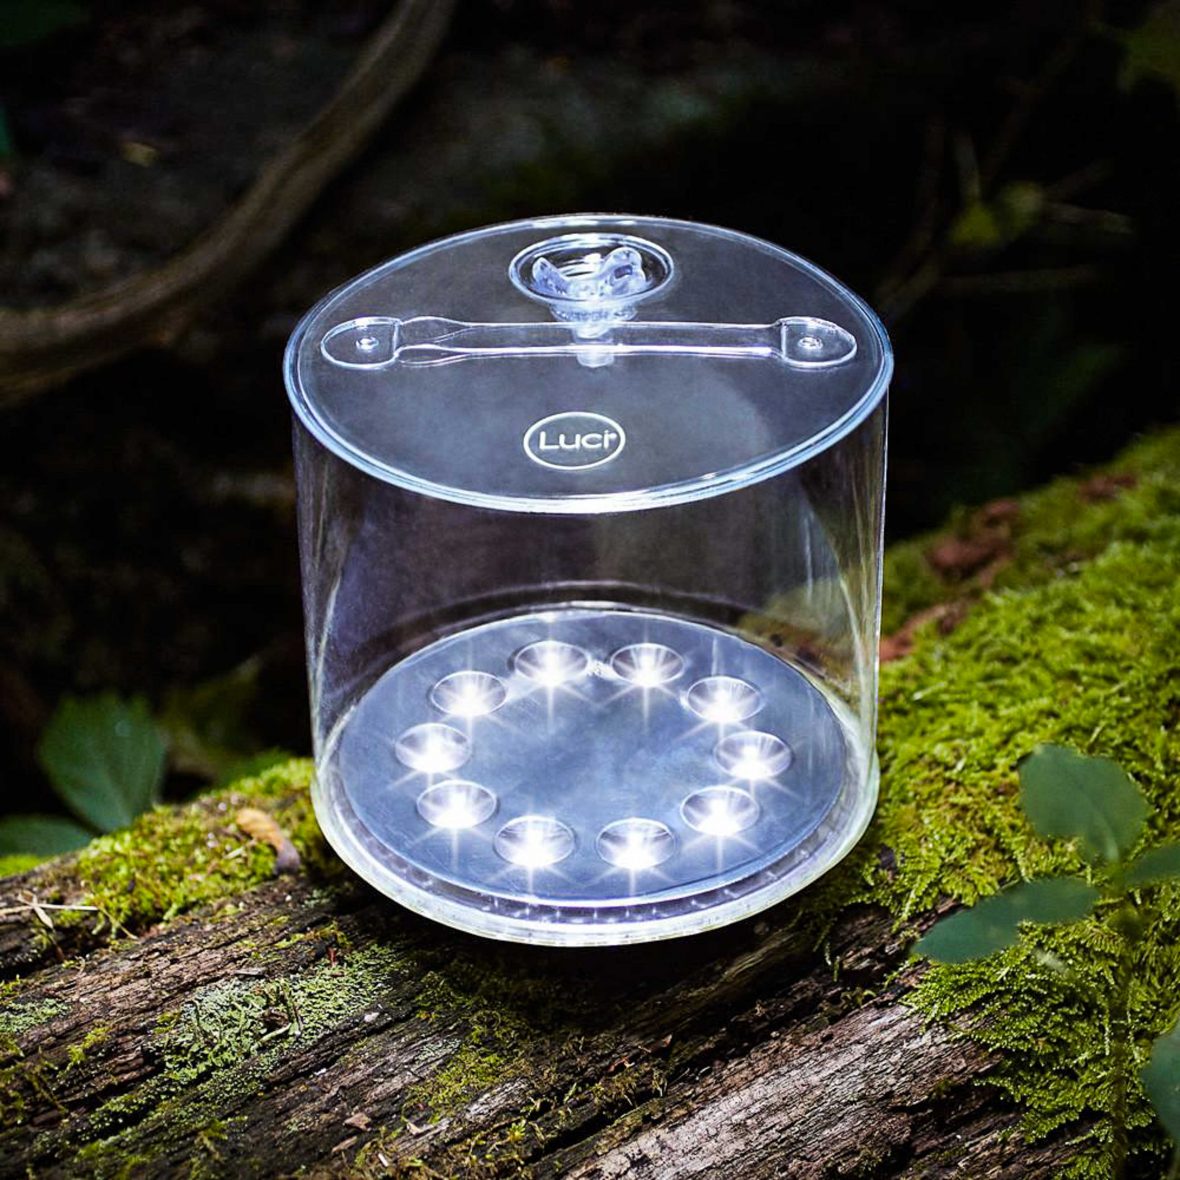 MPOWERD's waterproof, inflatable solar Luci light is collapsible, sustainable and ultra-portable.